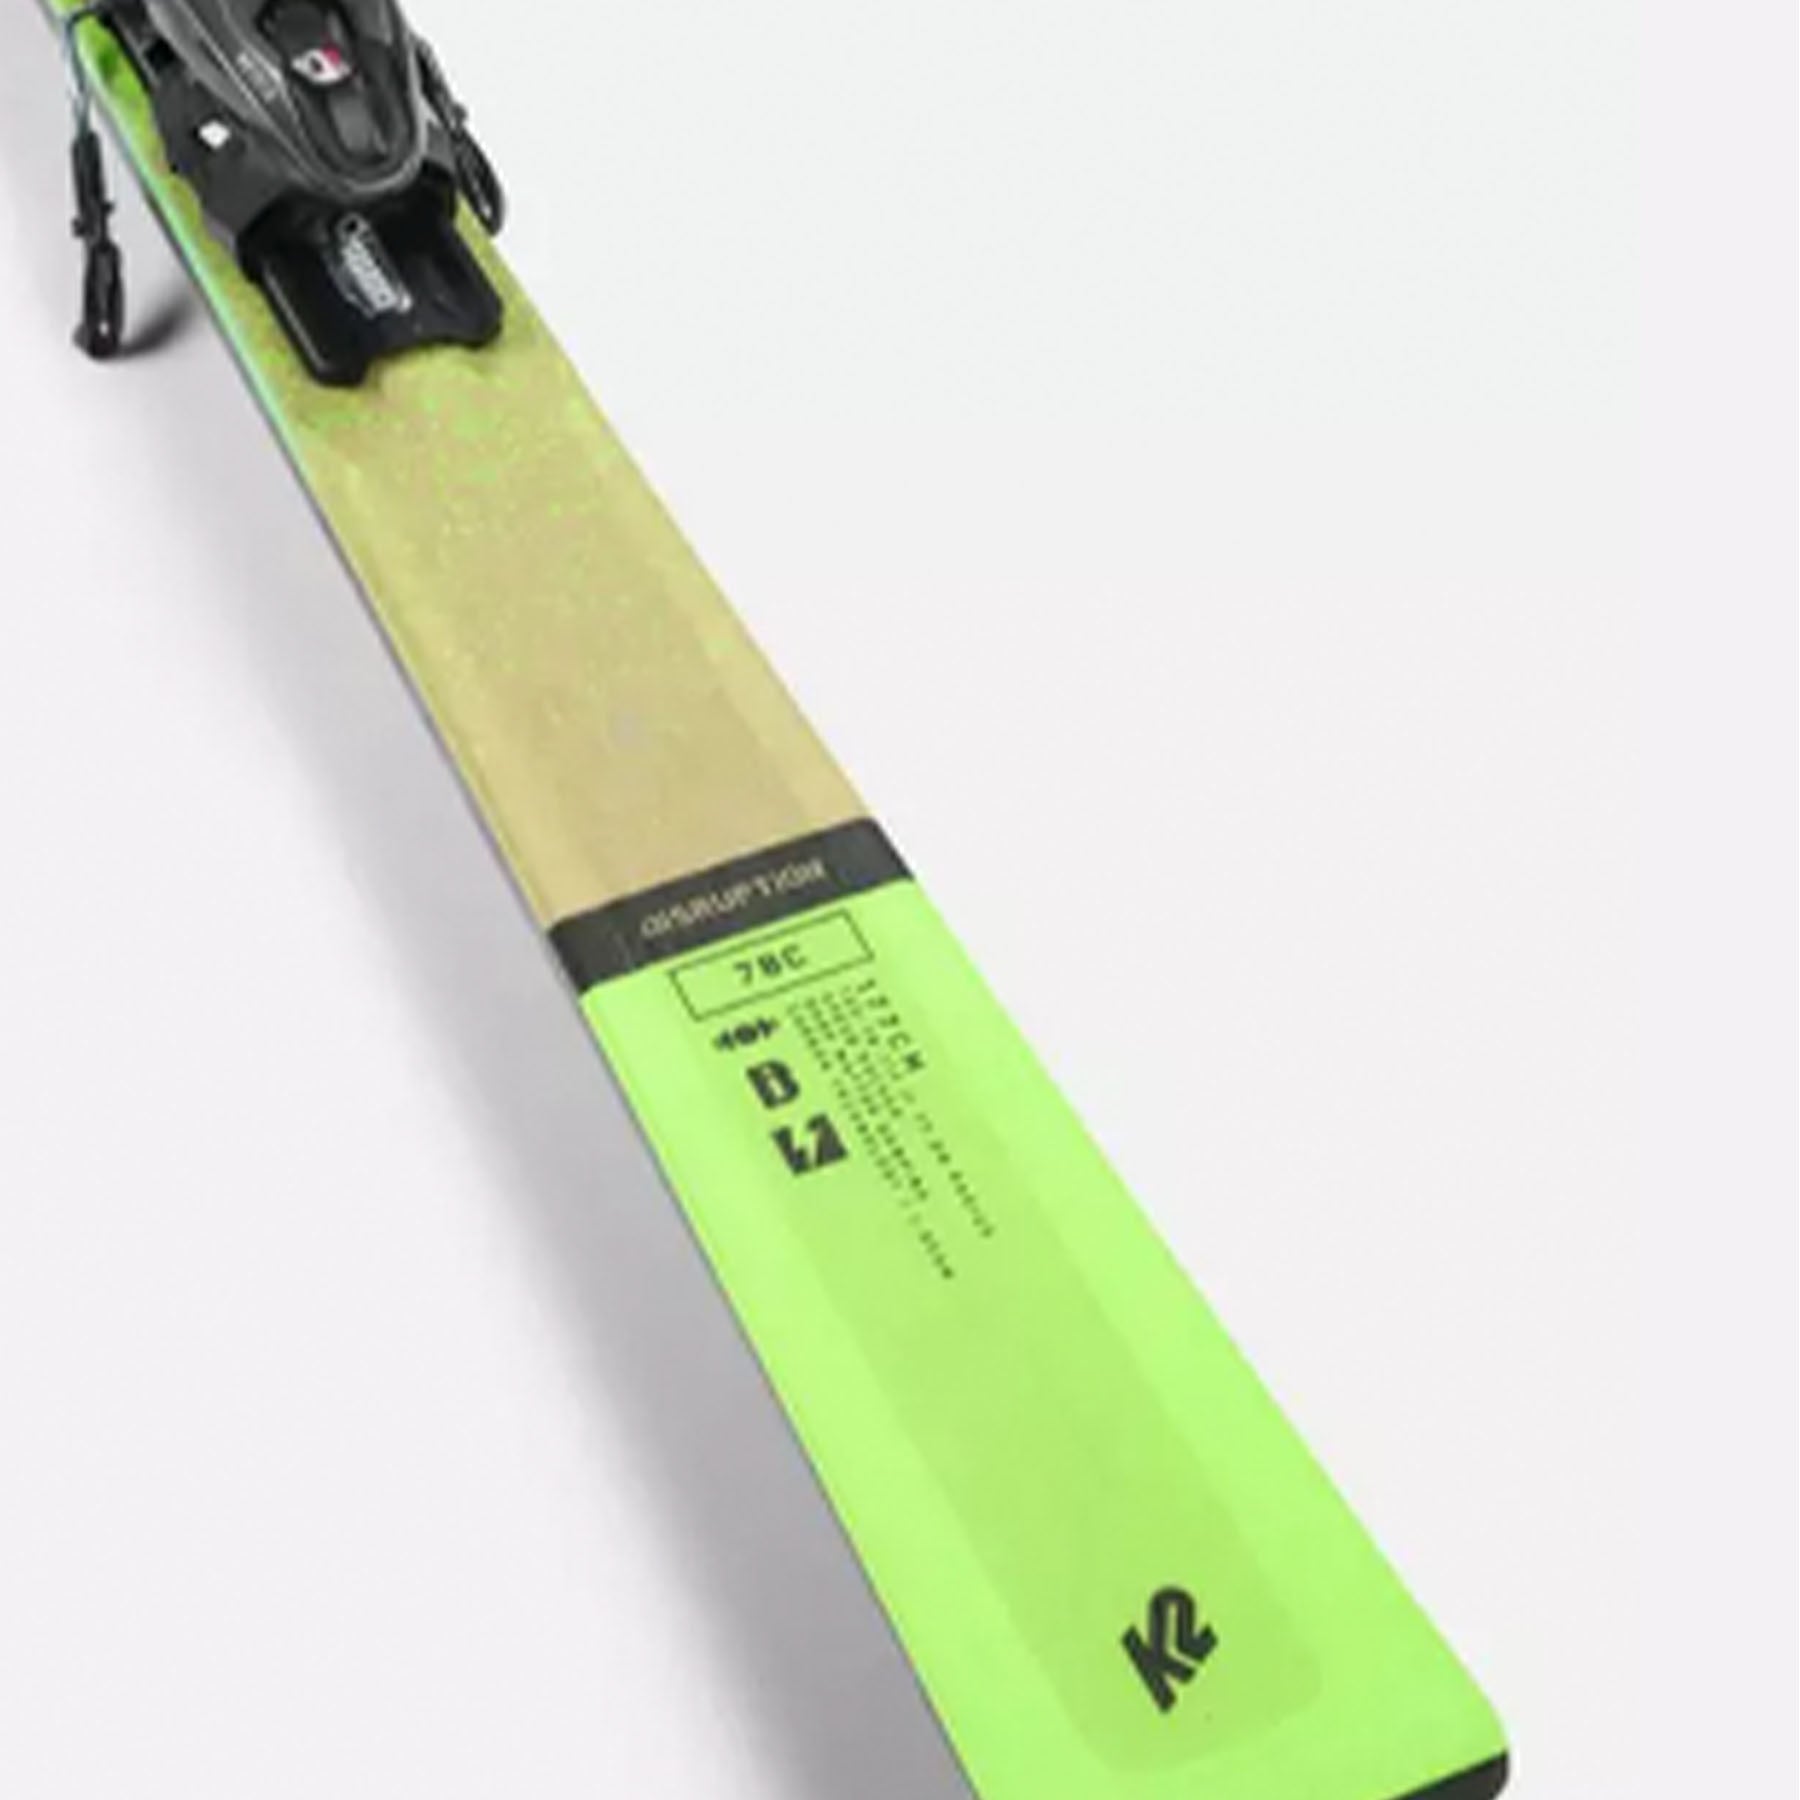 Image features the specs of the K2 Men's Disruption 78C skis printed on the topside of the tale